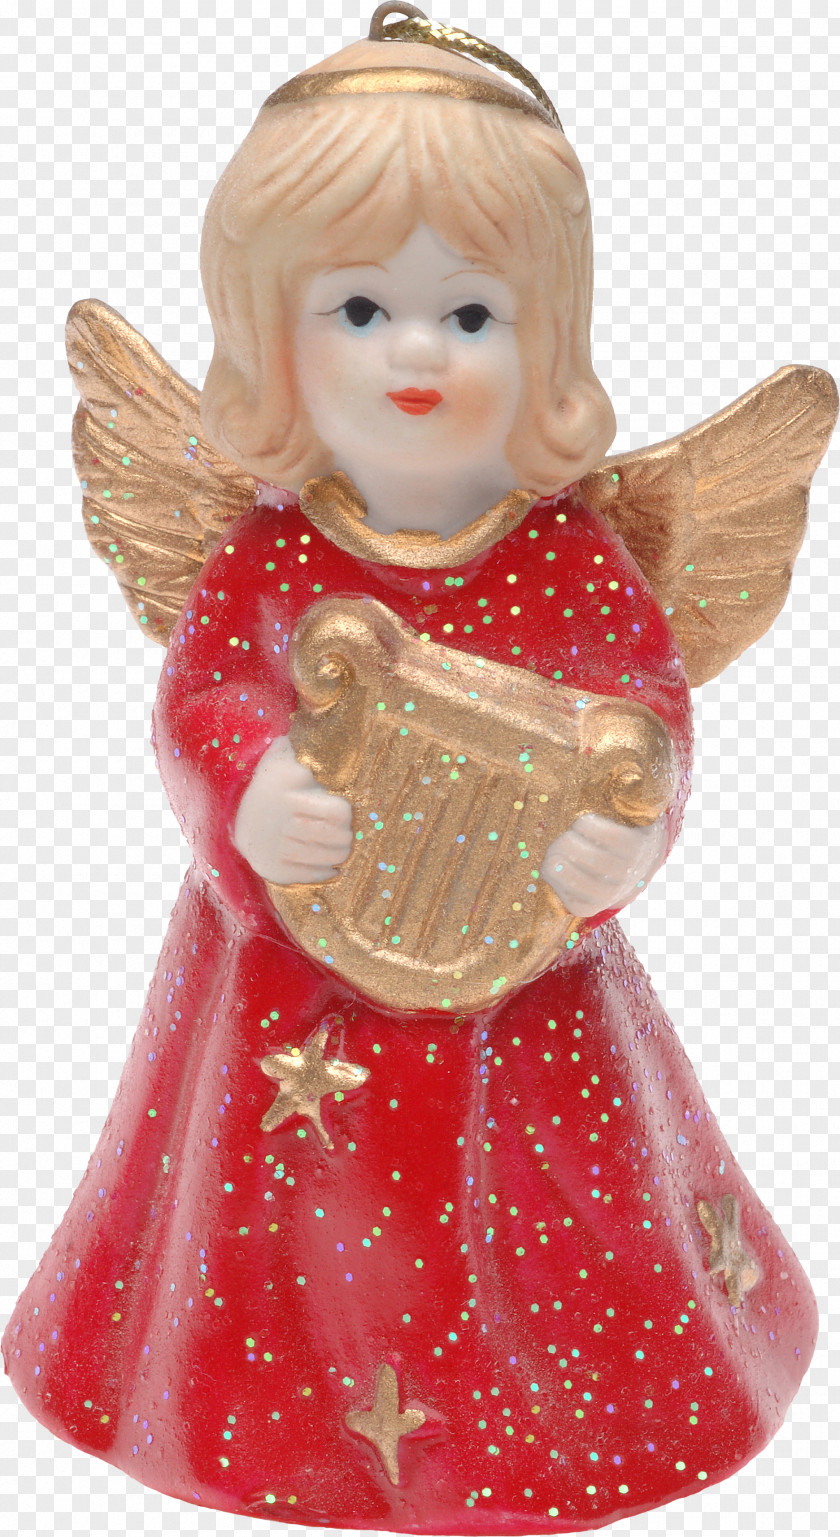 Toy Angel Christmas Ornament Decoration Day New Year PNG